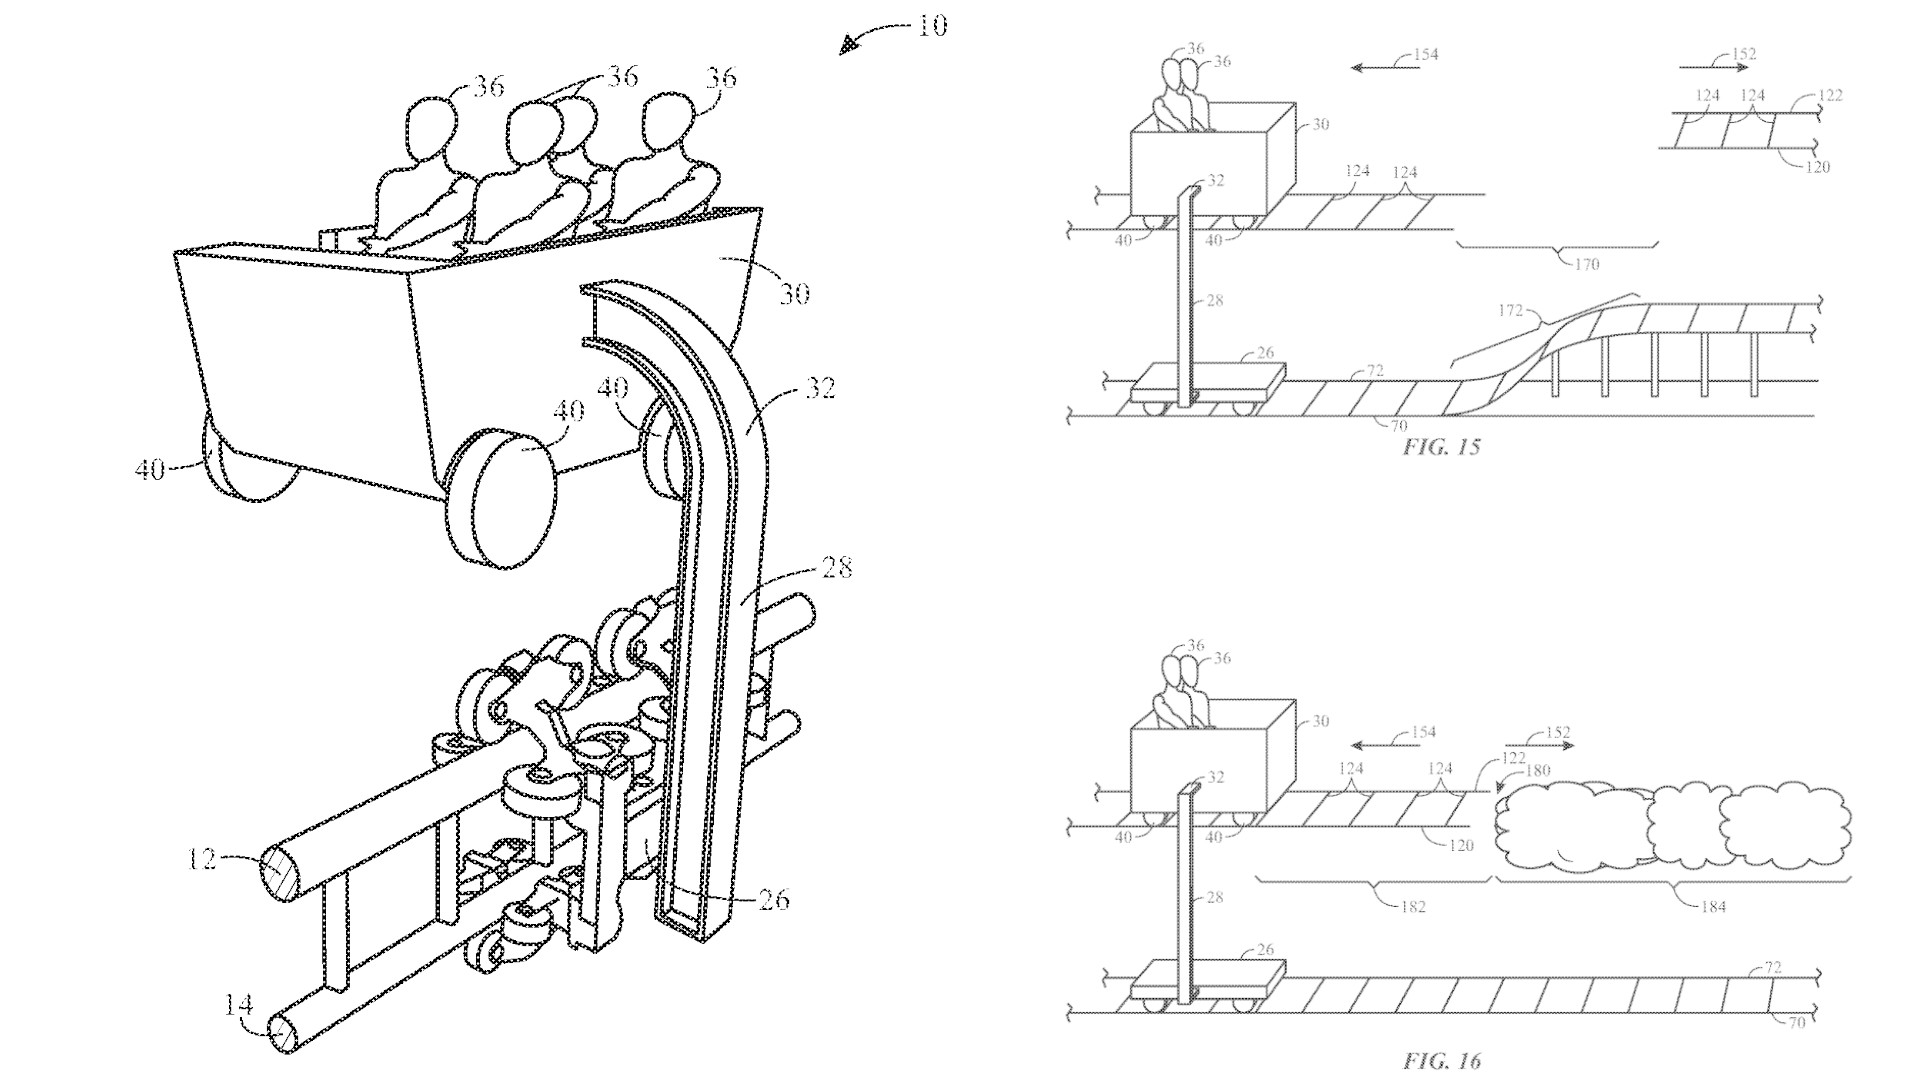 Boom Coaster Patent For Potential Donkey Kong Roller-Coaster In Universal Studios and Super Nintendo World